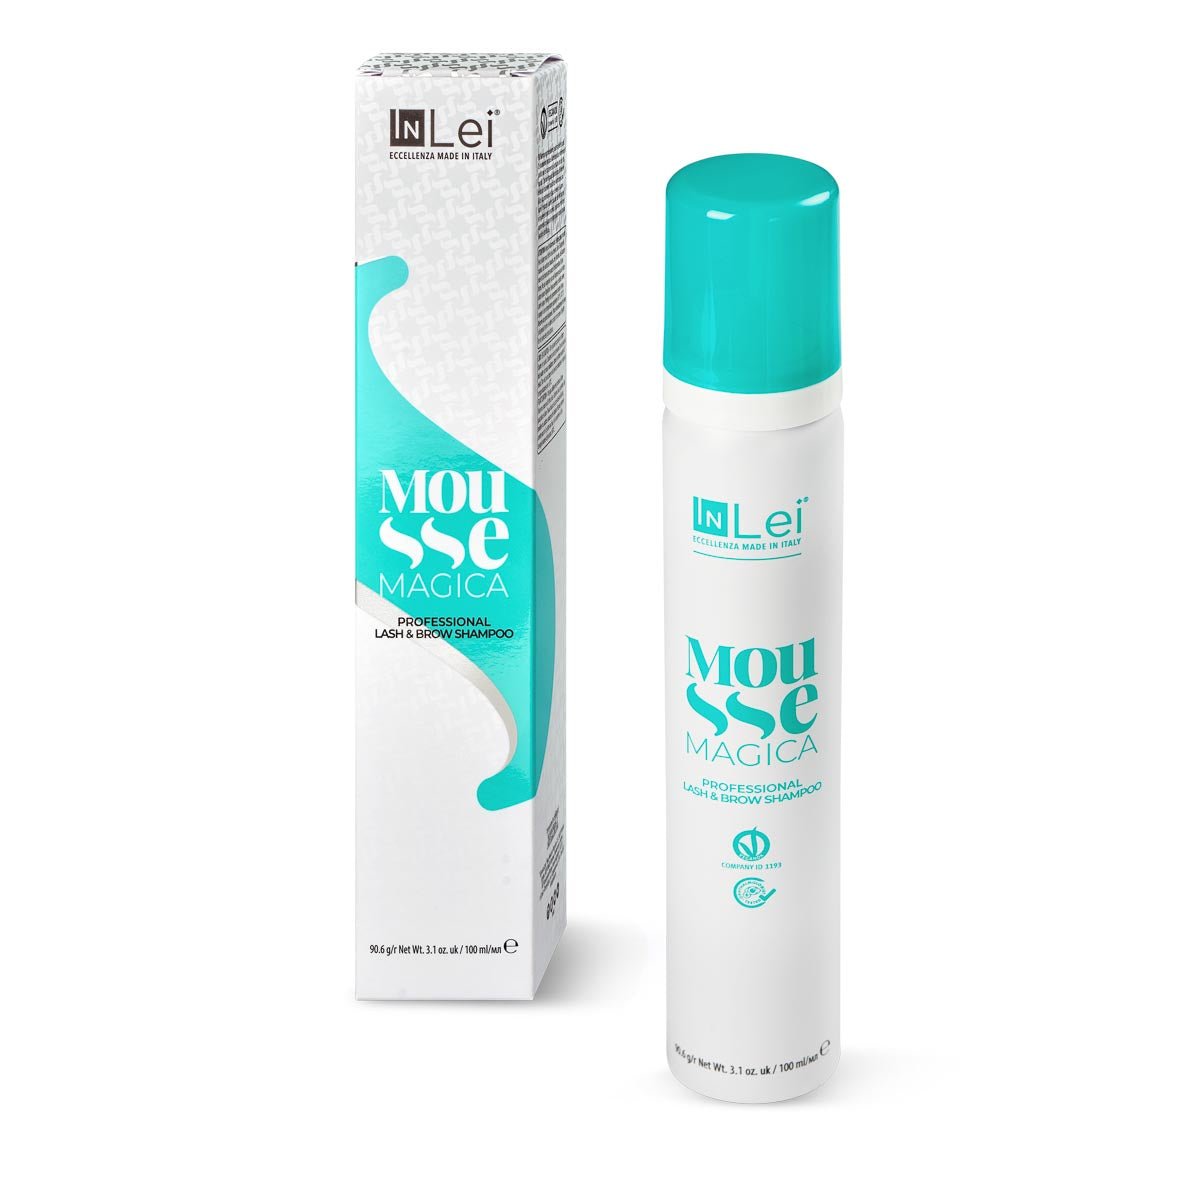 InLei - MOUSSE MAGICA - PROFESSIONAL SHAMPOO FOR EYELASHES AND EYEBROWS 100M - inlei.com